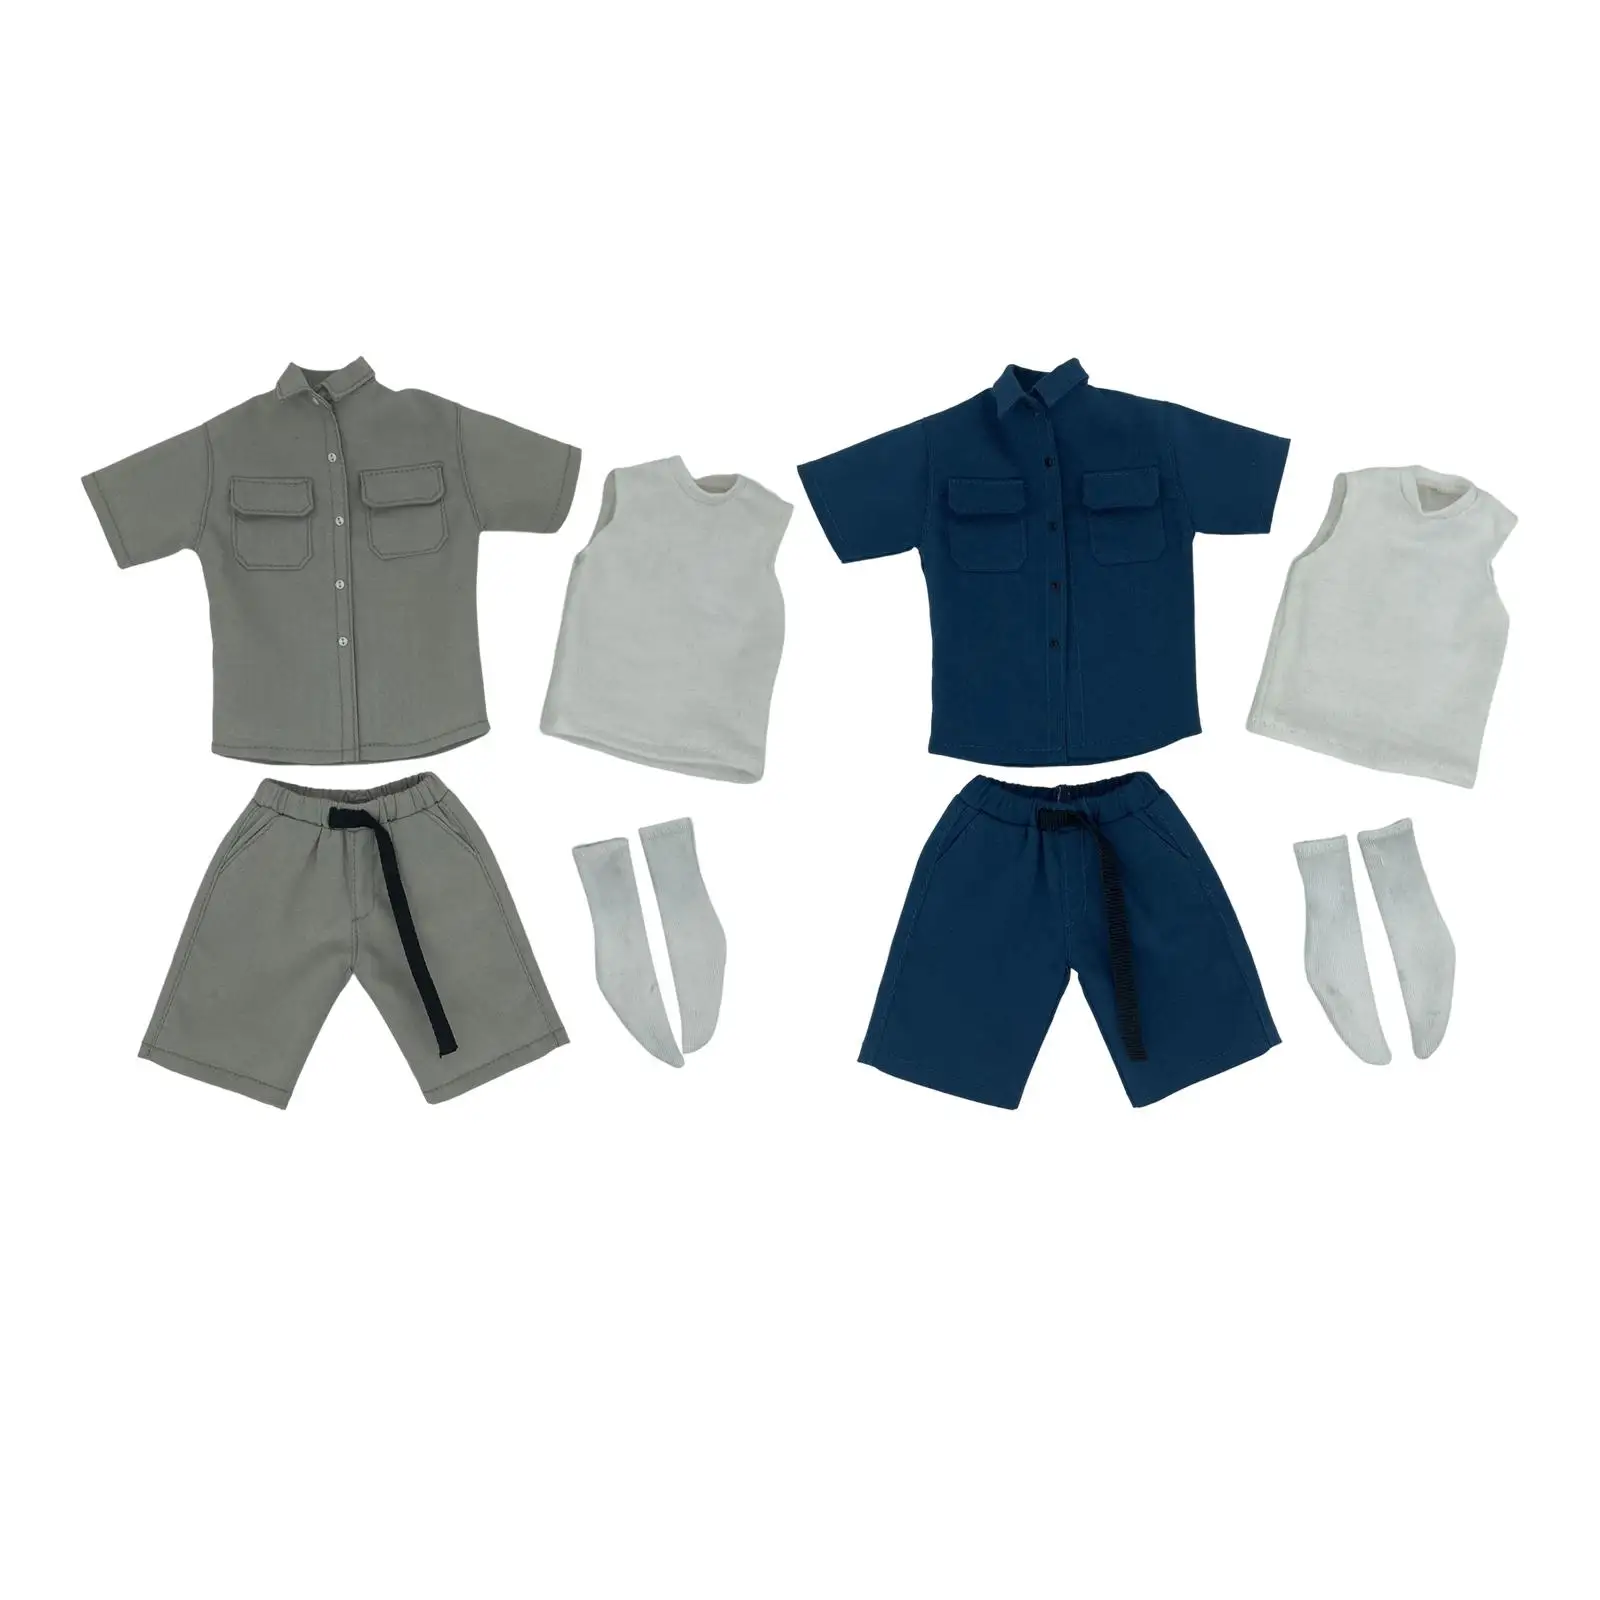 

12 inch Figure Clothes Cloth Vest Shorts Socks Shirt 1/6 Scale Solder Overalls Outfit for Soldier Action Figure Accessory